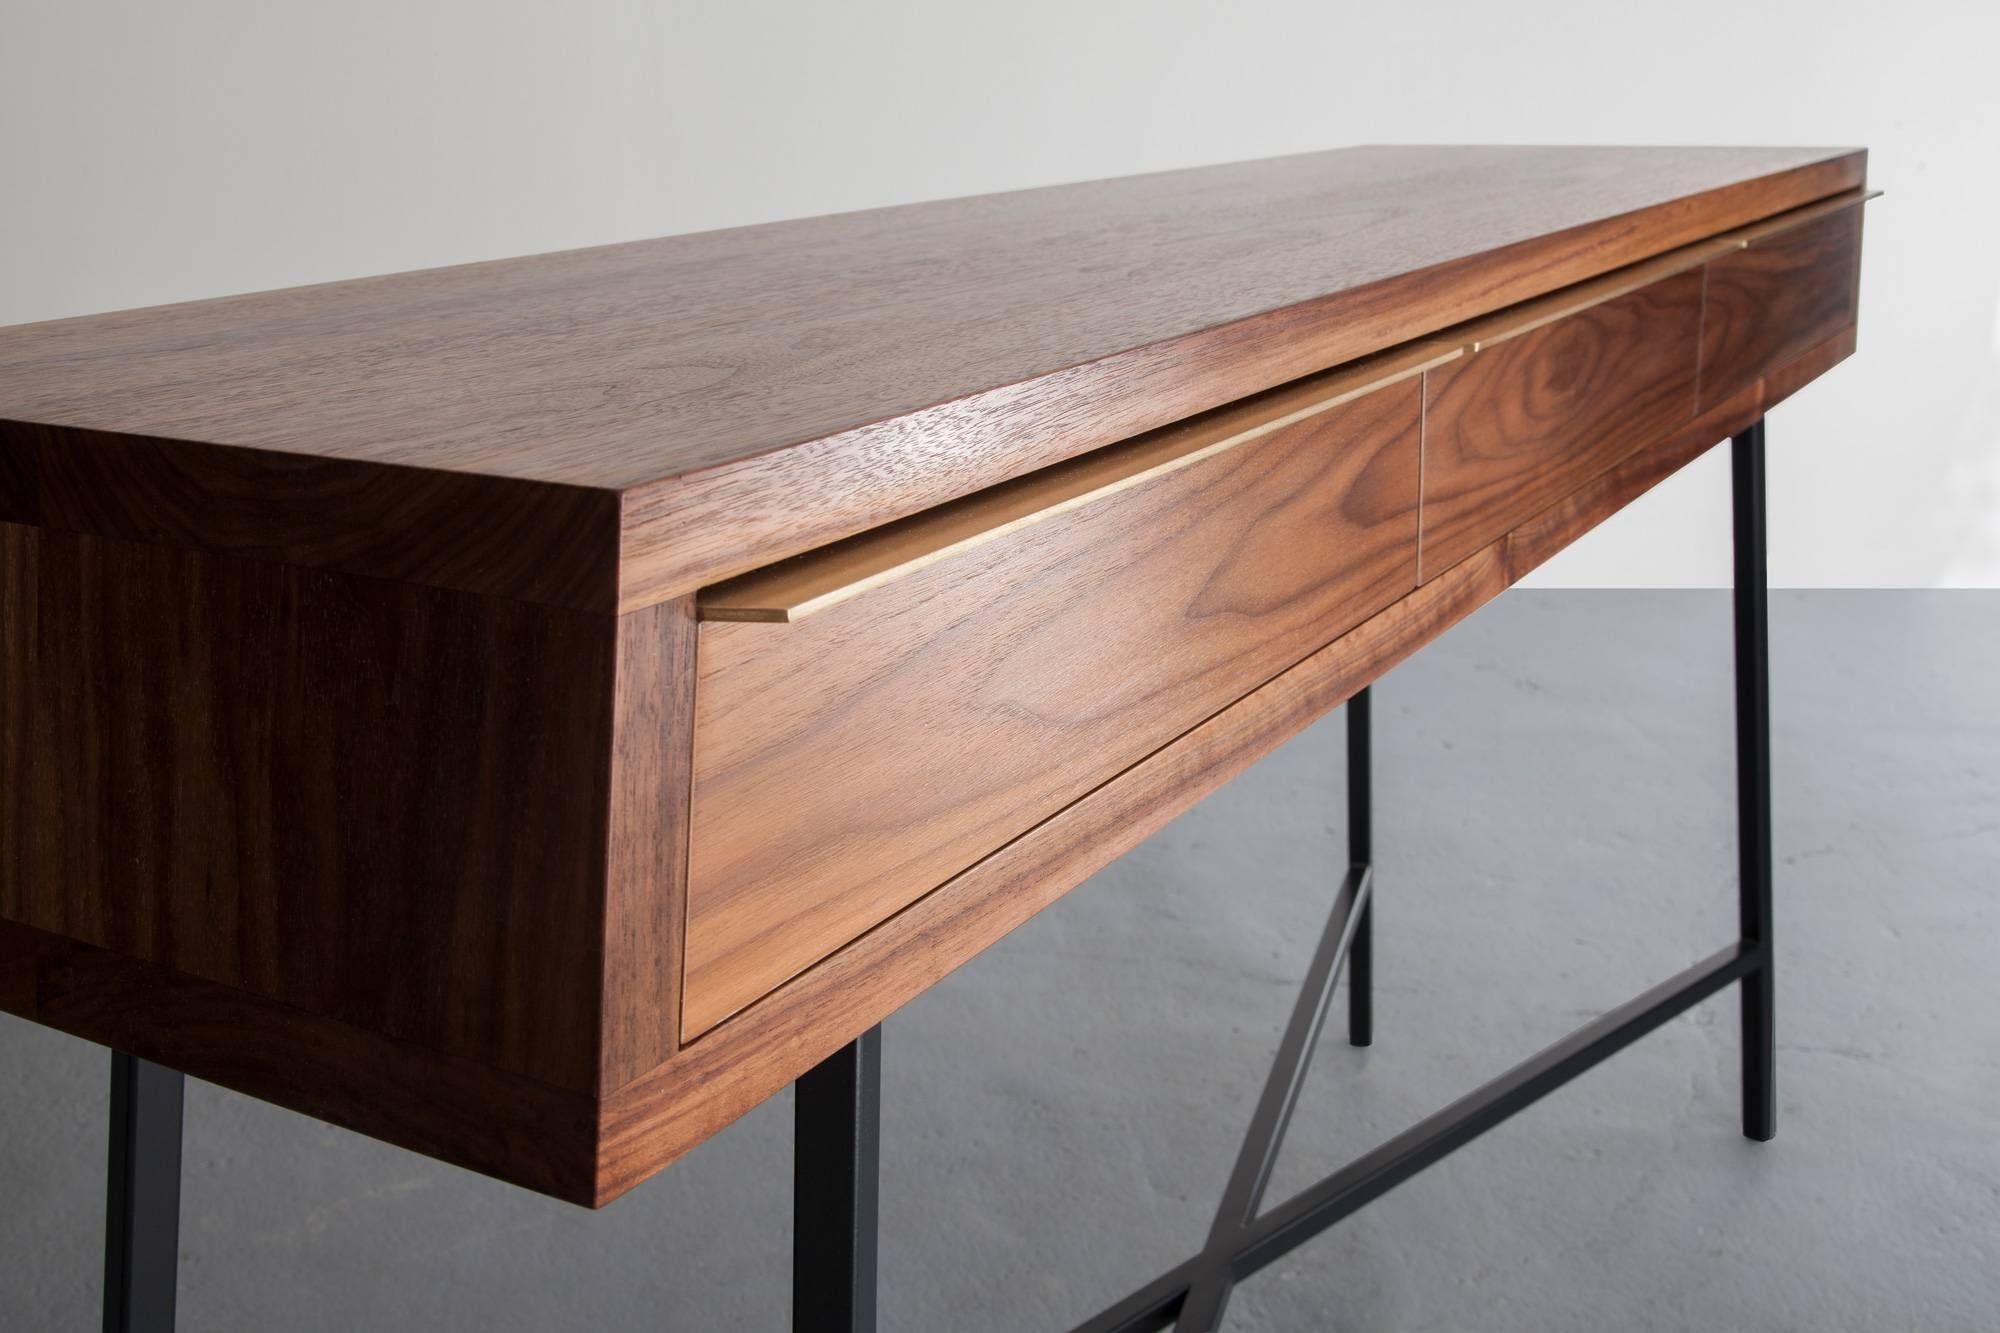 The Tzoid console is a walnut hardwood case sitting atop a black / grey powder coated steel frame complete with brass pulls. Shown in walnut and available in ash, maple, and white oak. Powder coated frame is shown in black grey and also available in